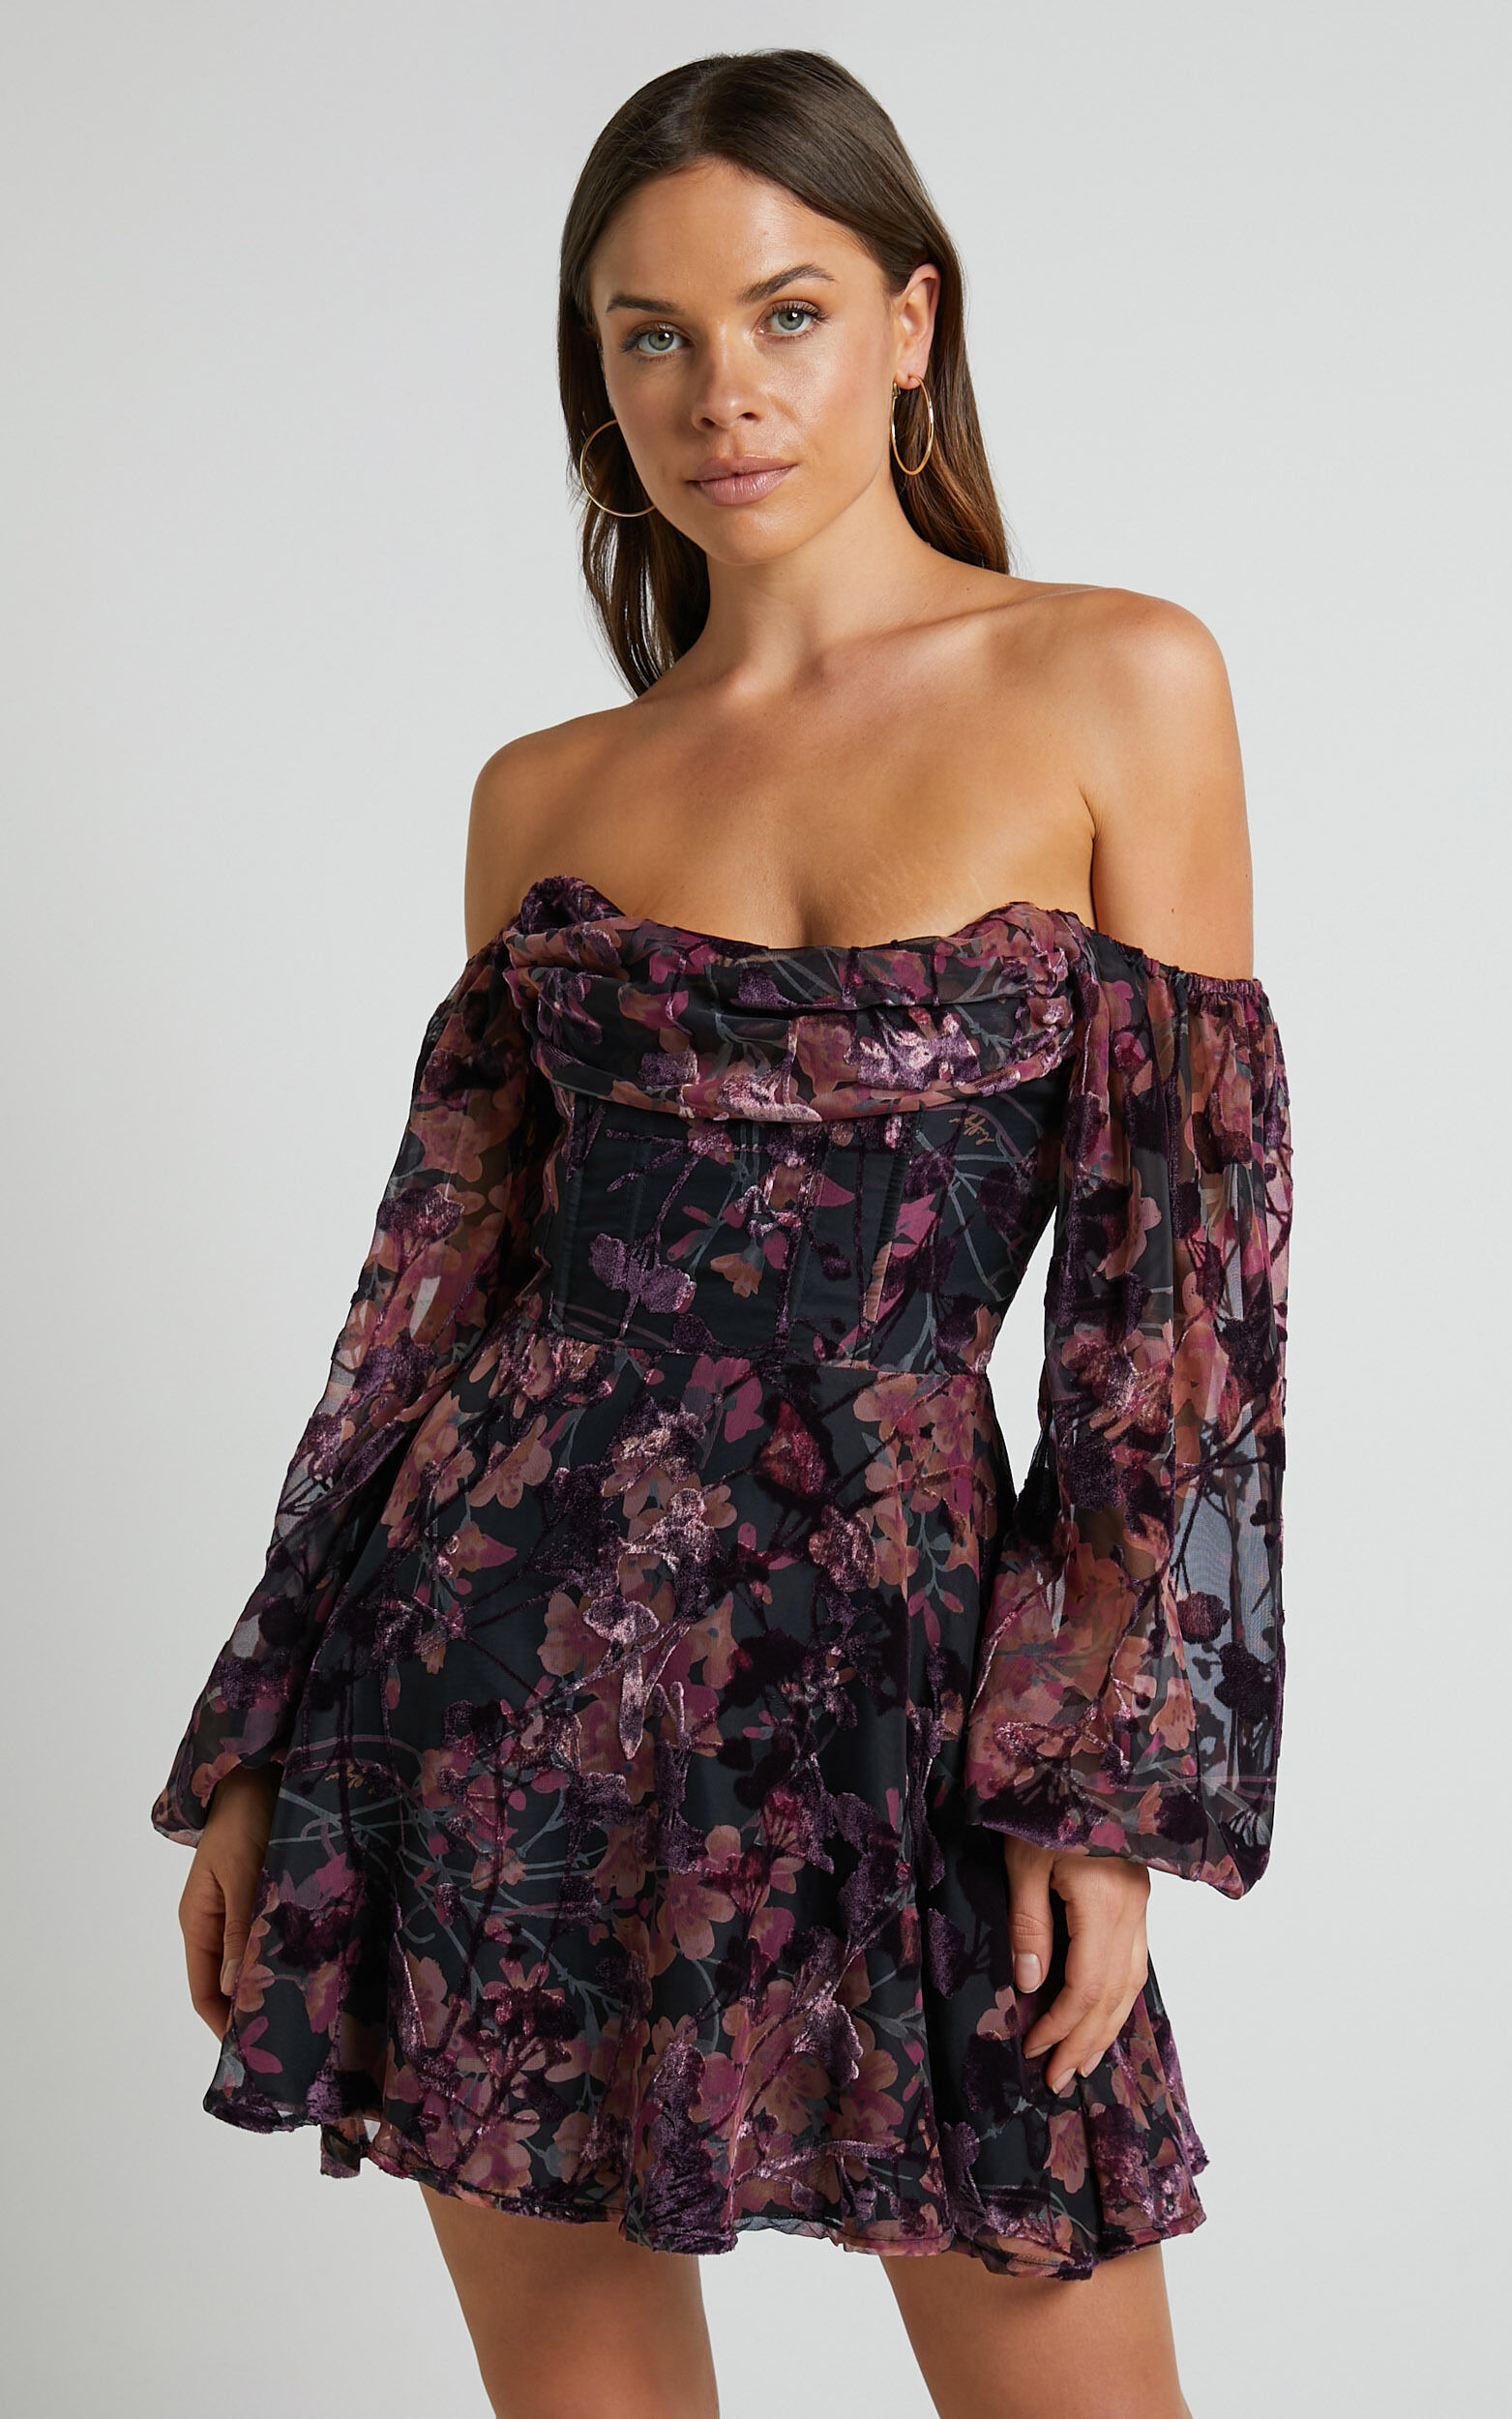 Jessell Mini Dress - Long Sleeve Cowl Corset Dress in Burnt Out Floral - 04, PRP1, super-hi-res image number null